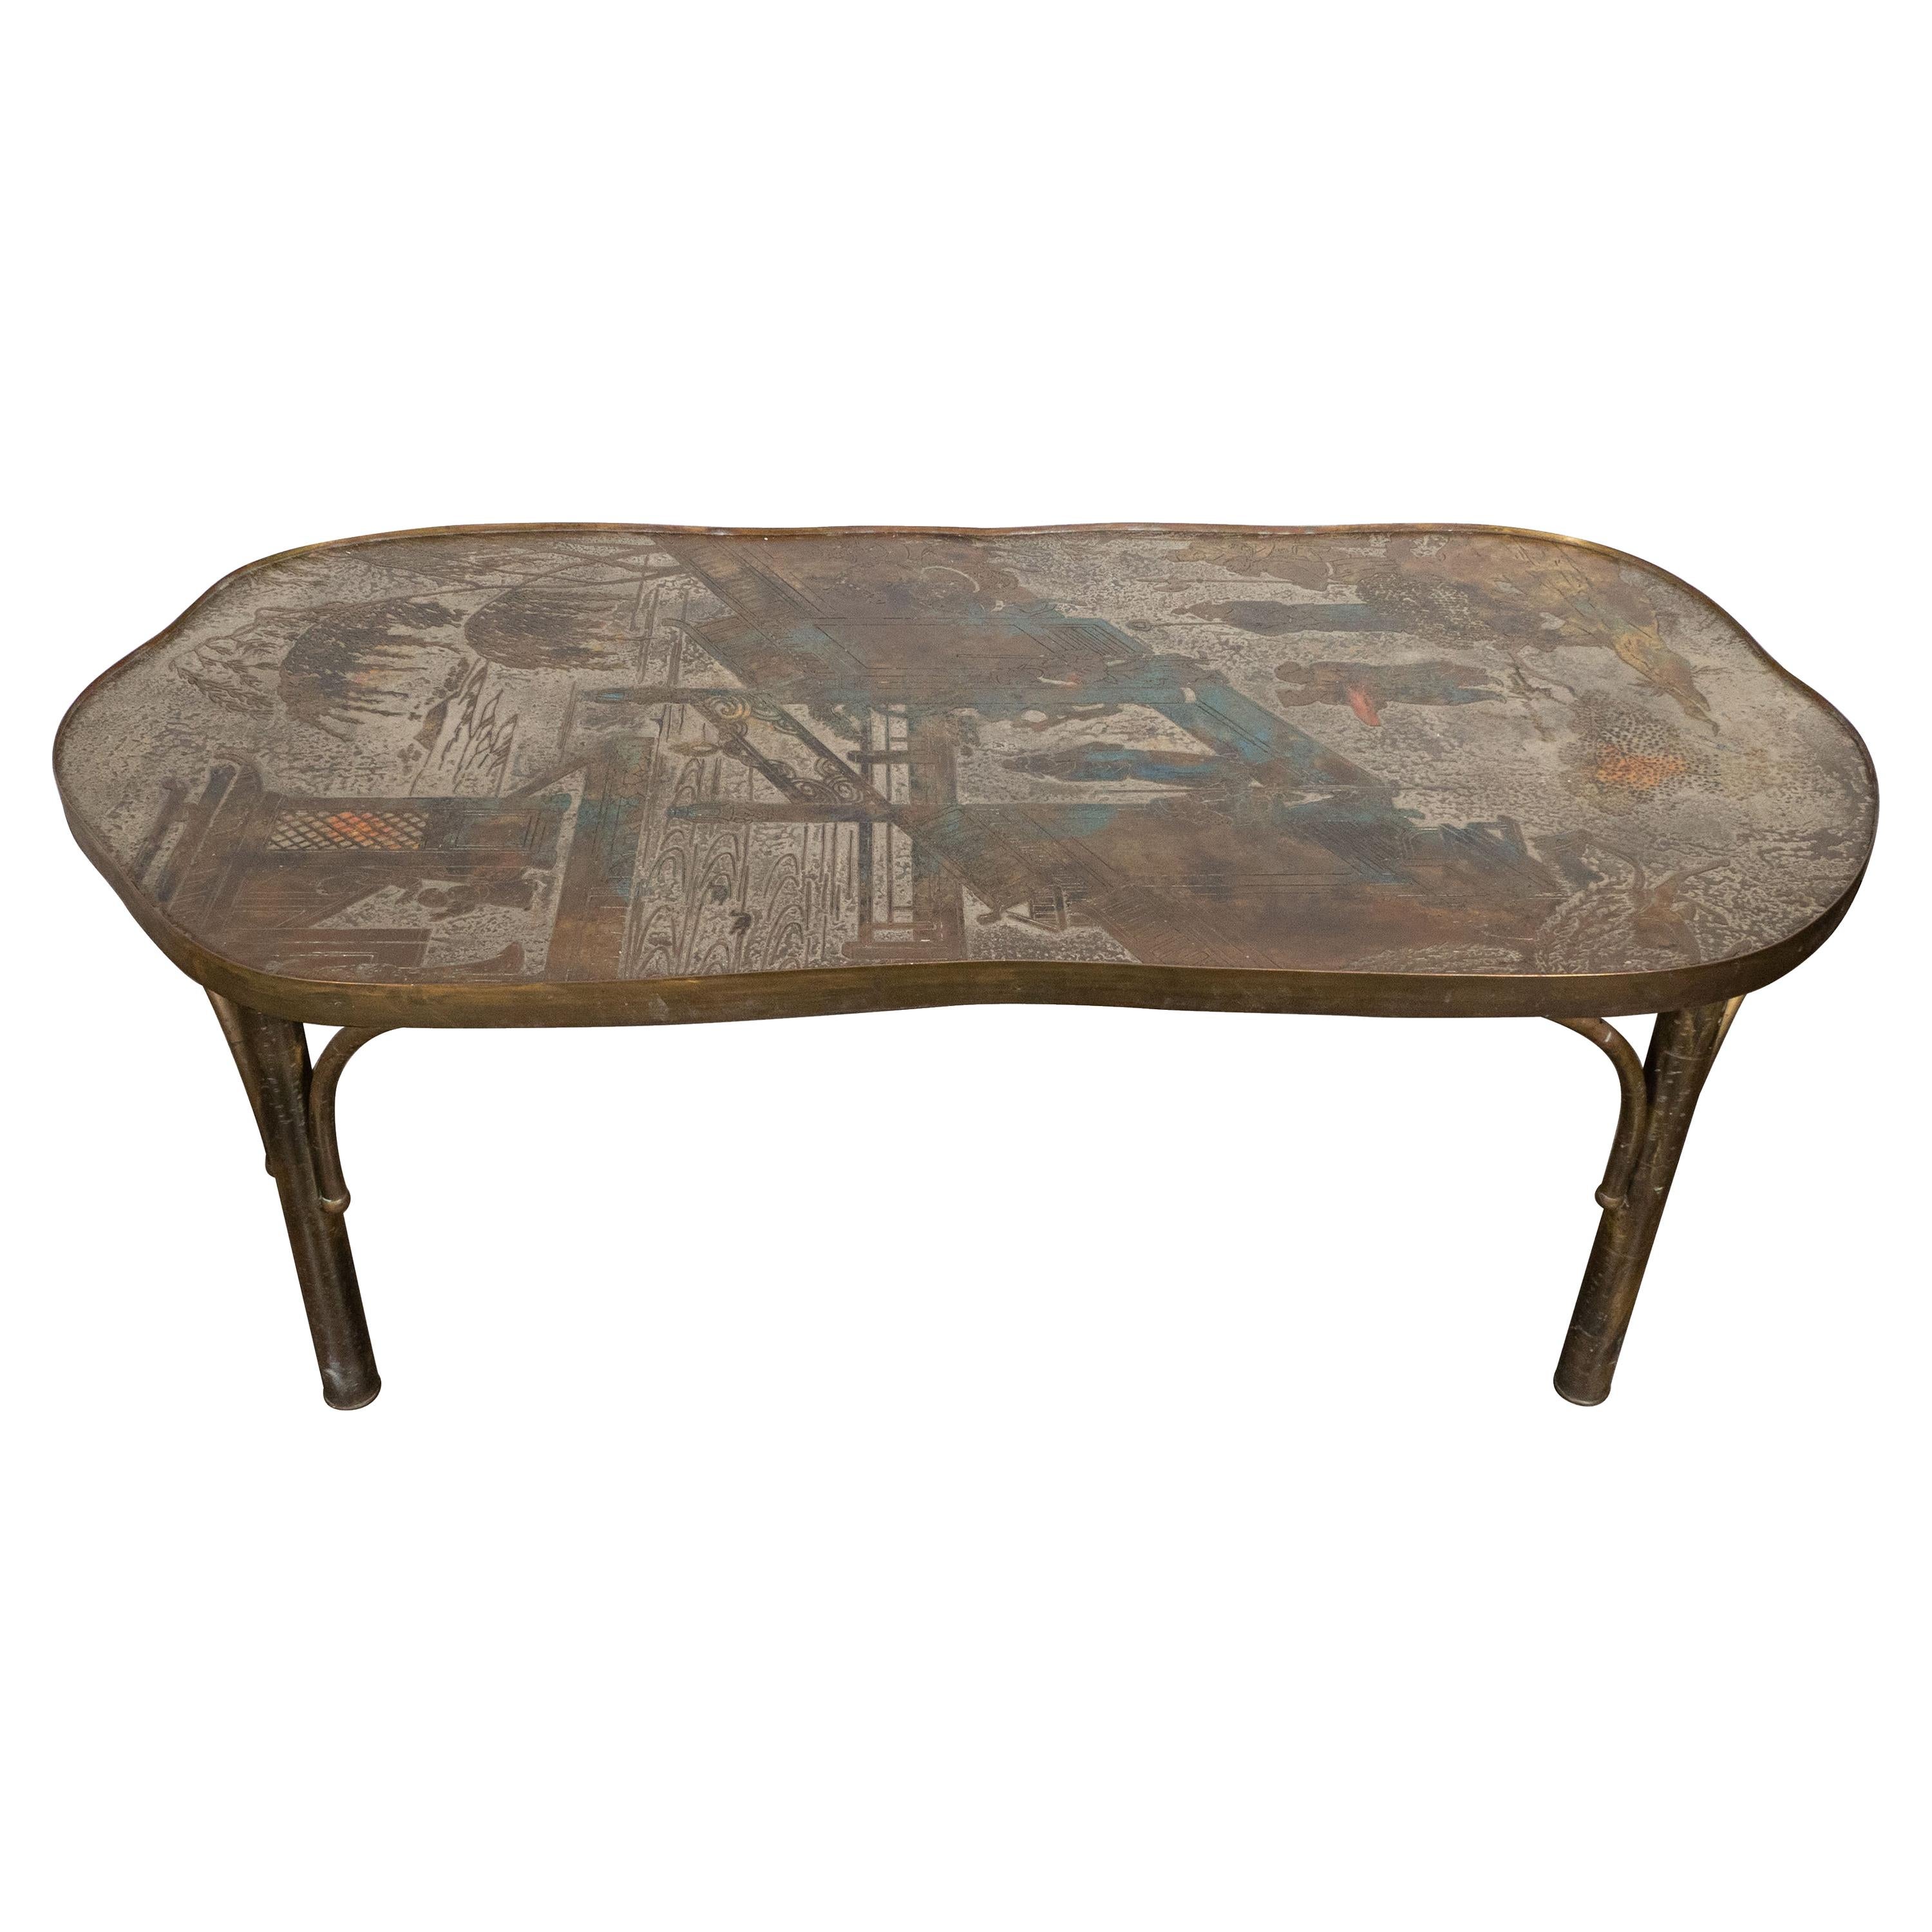 Midcentury Philip and Kelvin LaVerne "Chan 140" Pewter and Bronze Coffee Table